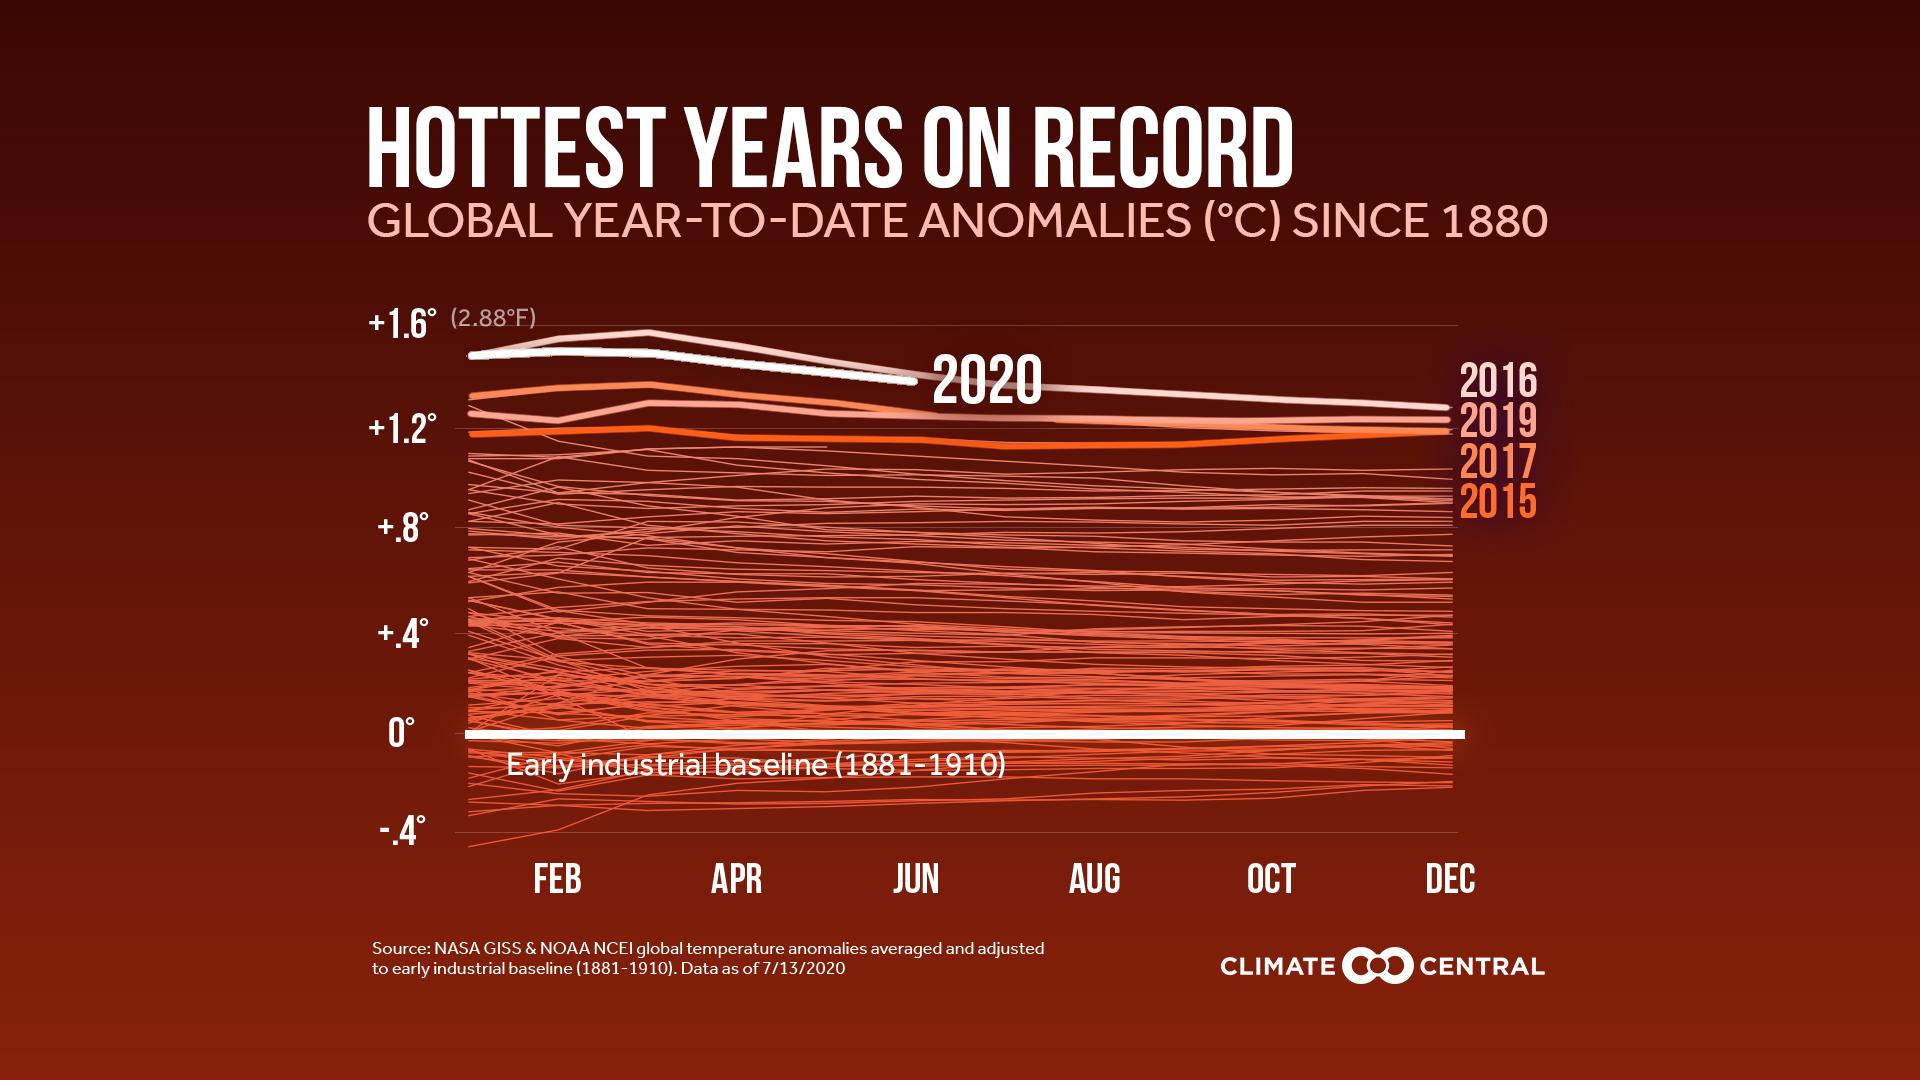 Global Temperatures Near Hottest on Record - Global Temperatures Near Hottest on Record